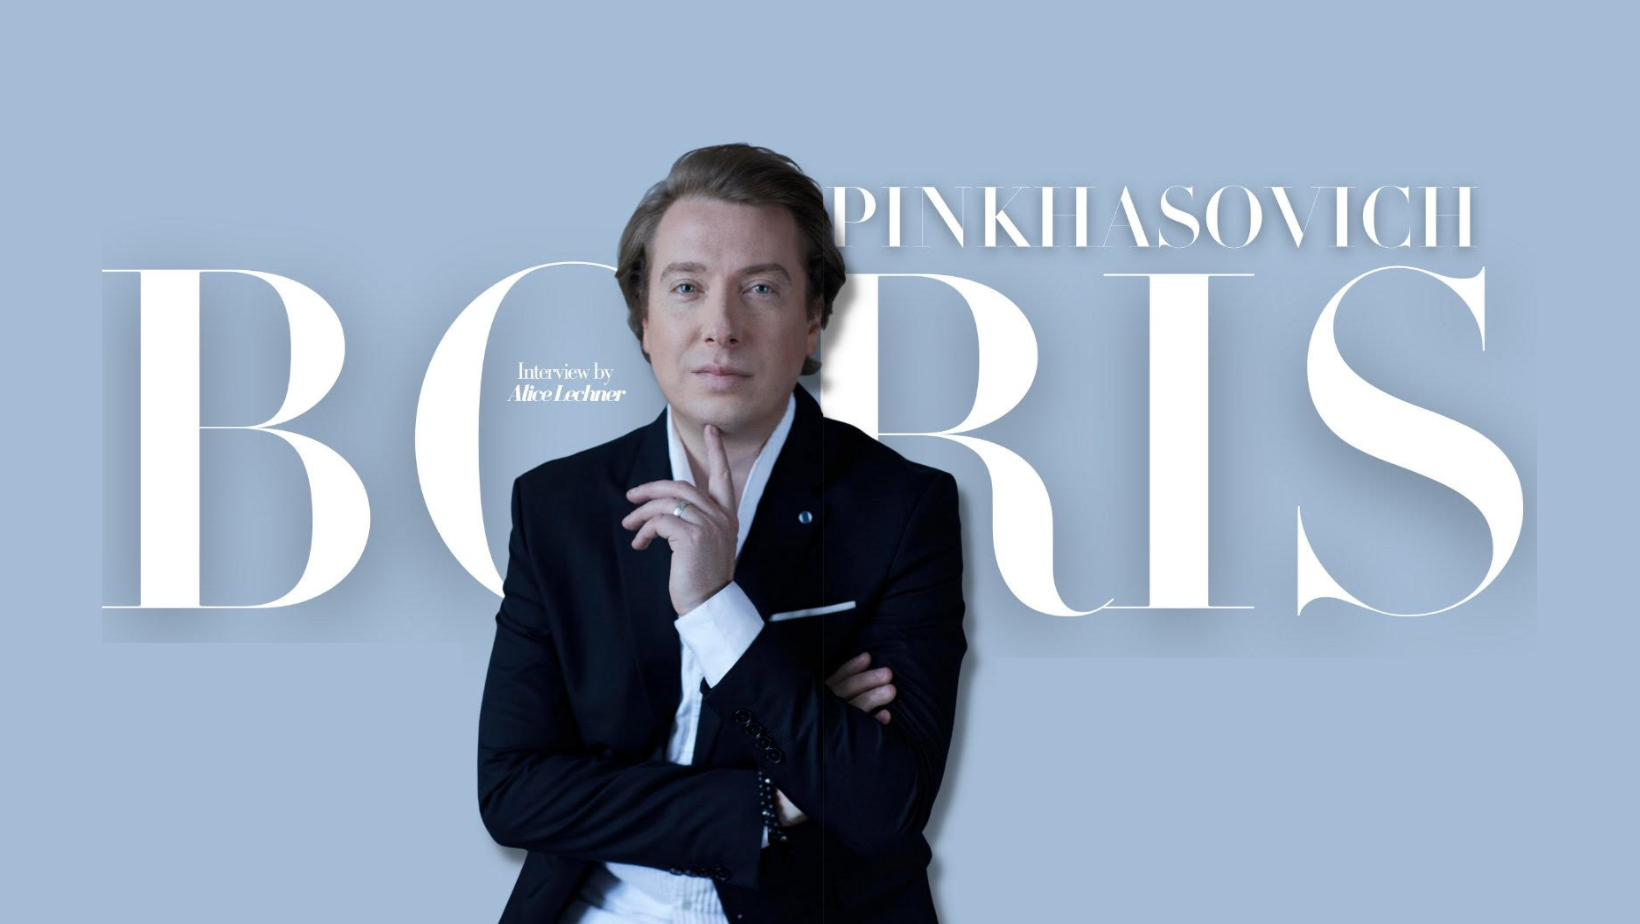 Baritone Boris Pinkhasovich Opens Up in Exclusive Interview with OPERACharmMagazine